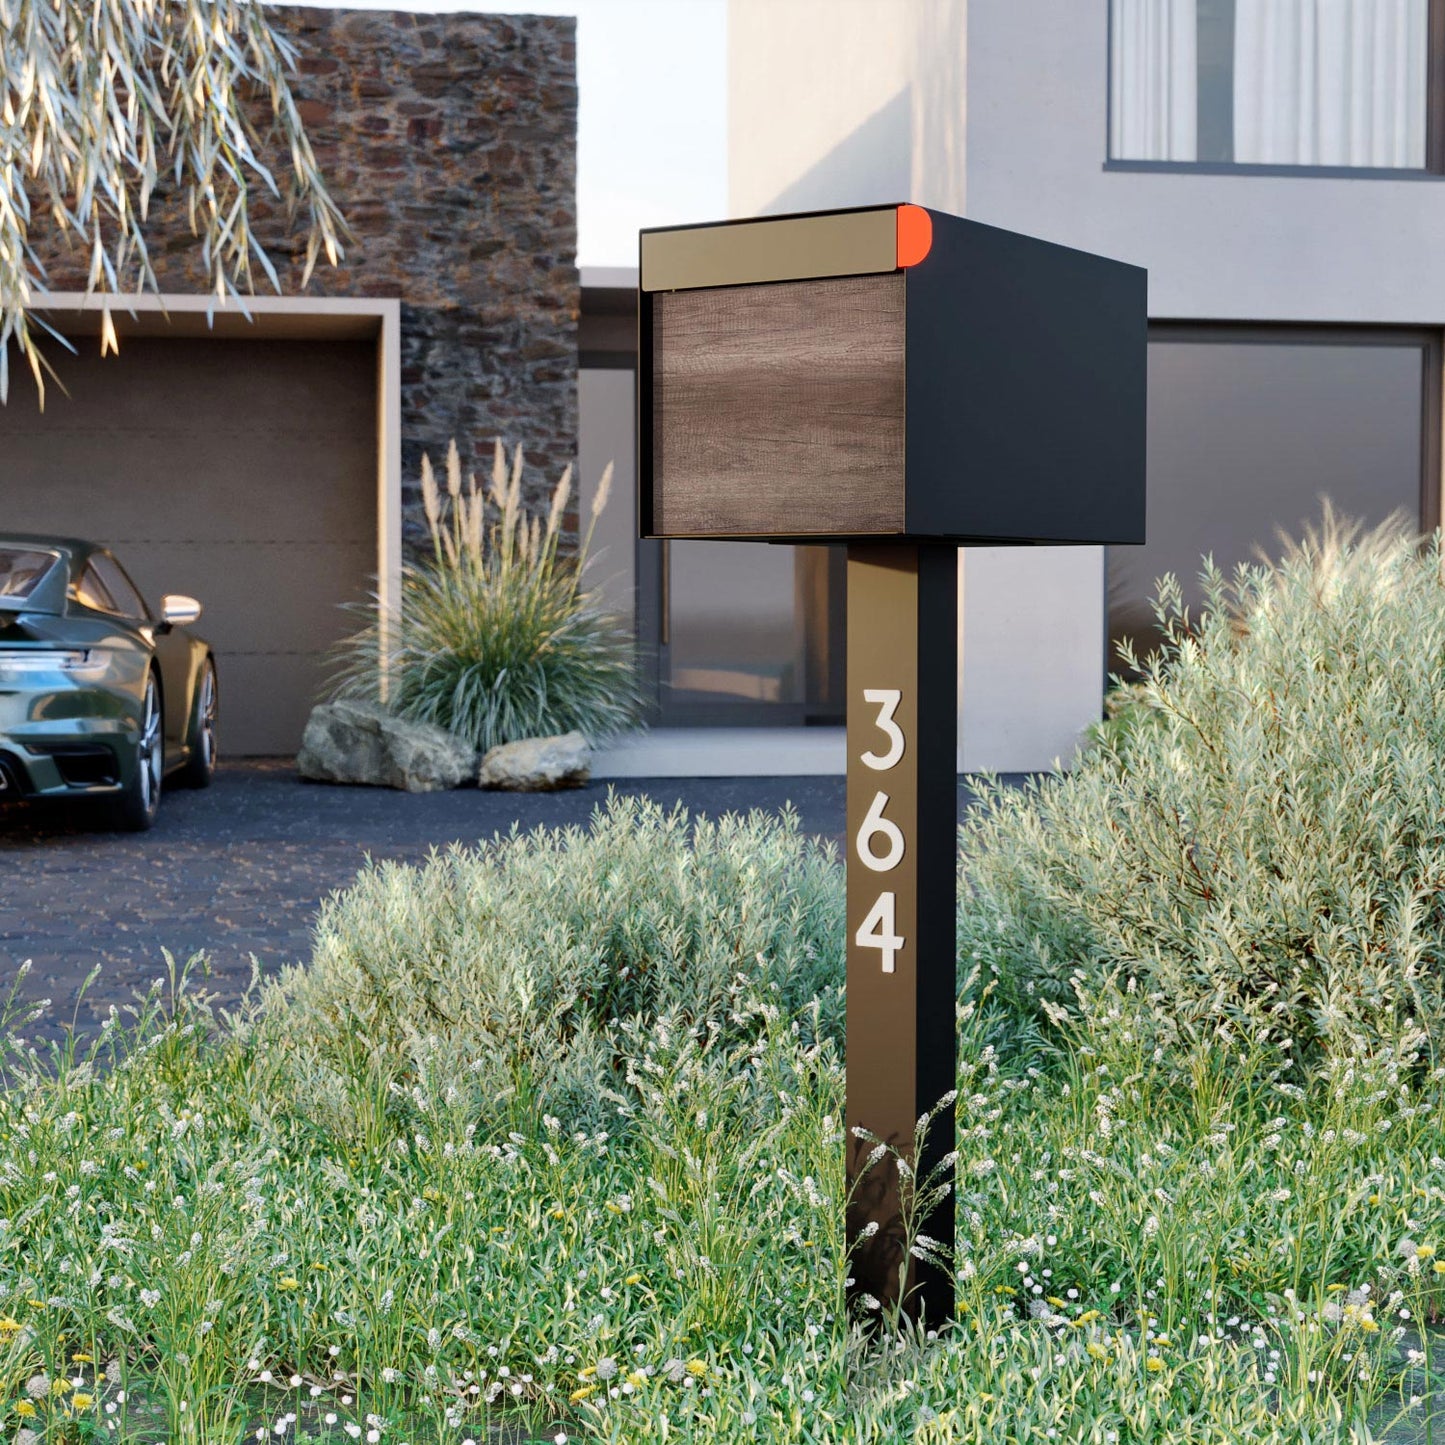 Town Square Mailbox by Bravios - Large Capacity Mailbox (Without Post) - Black with Marshland Oak Wood Panel